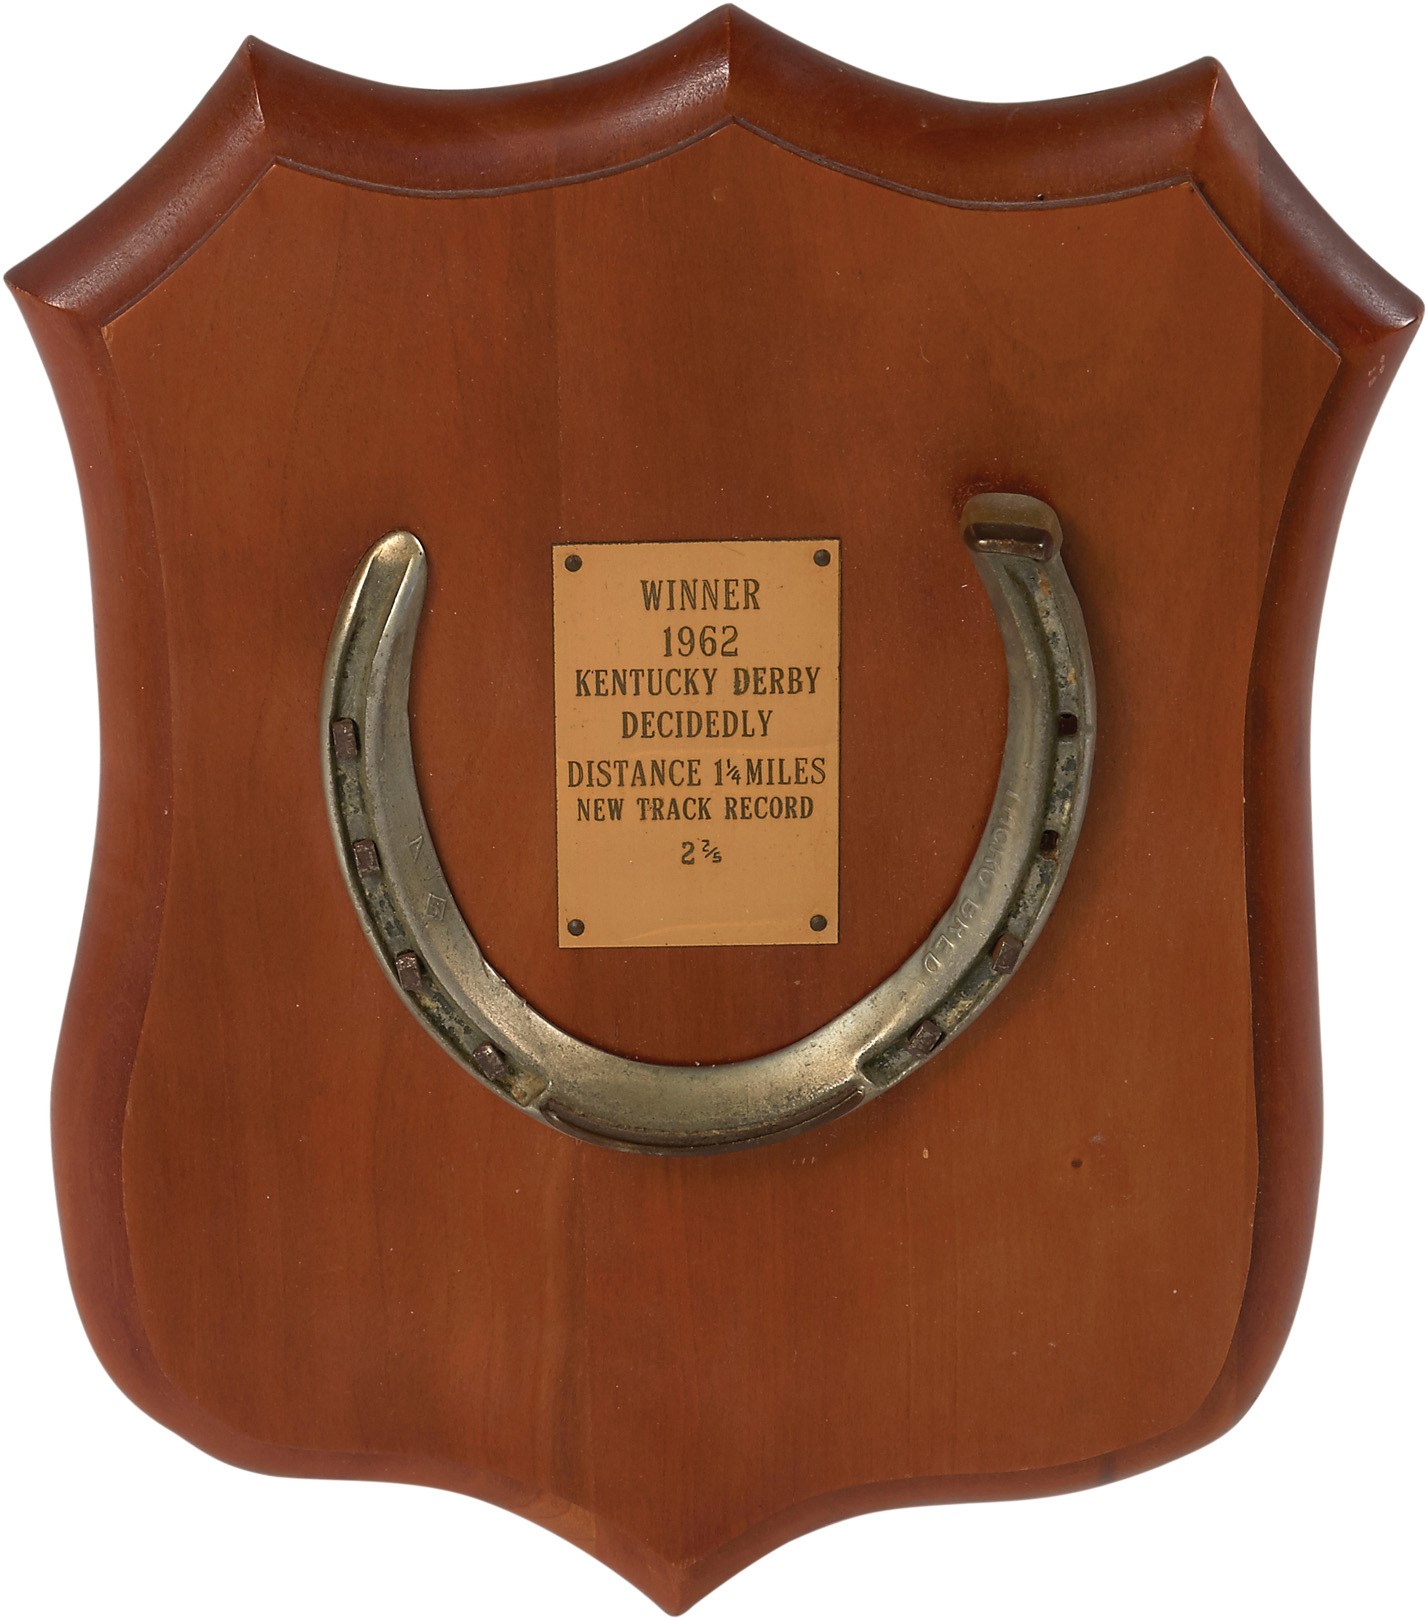 Horse Racing - 1962 "Decidedly" Kentucky Derby Record Breaking Horseshoe ("New Track Record")